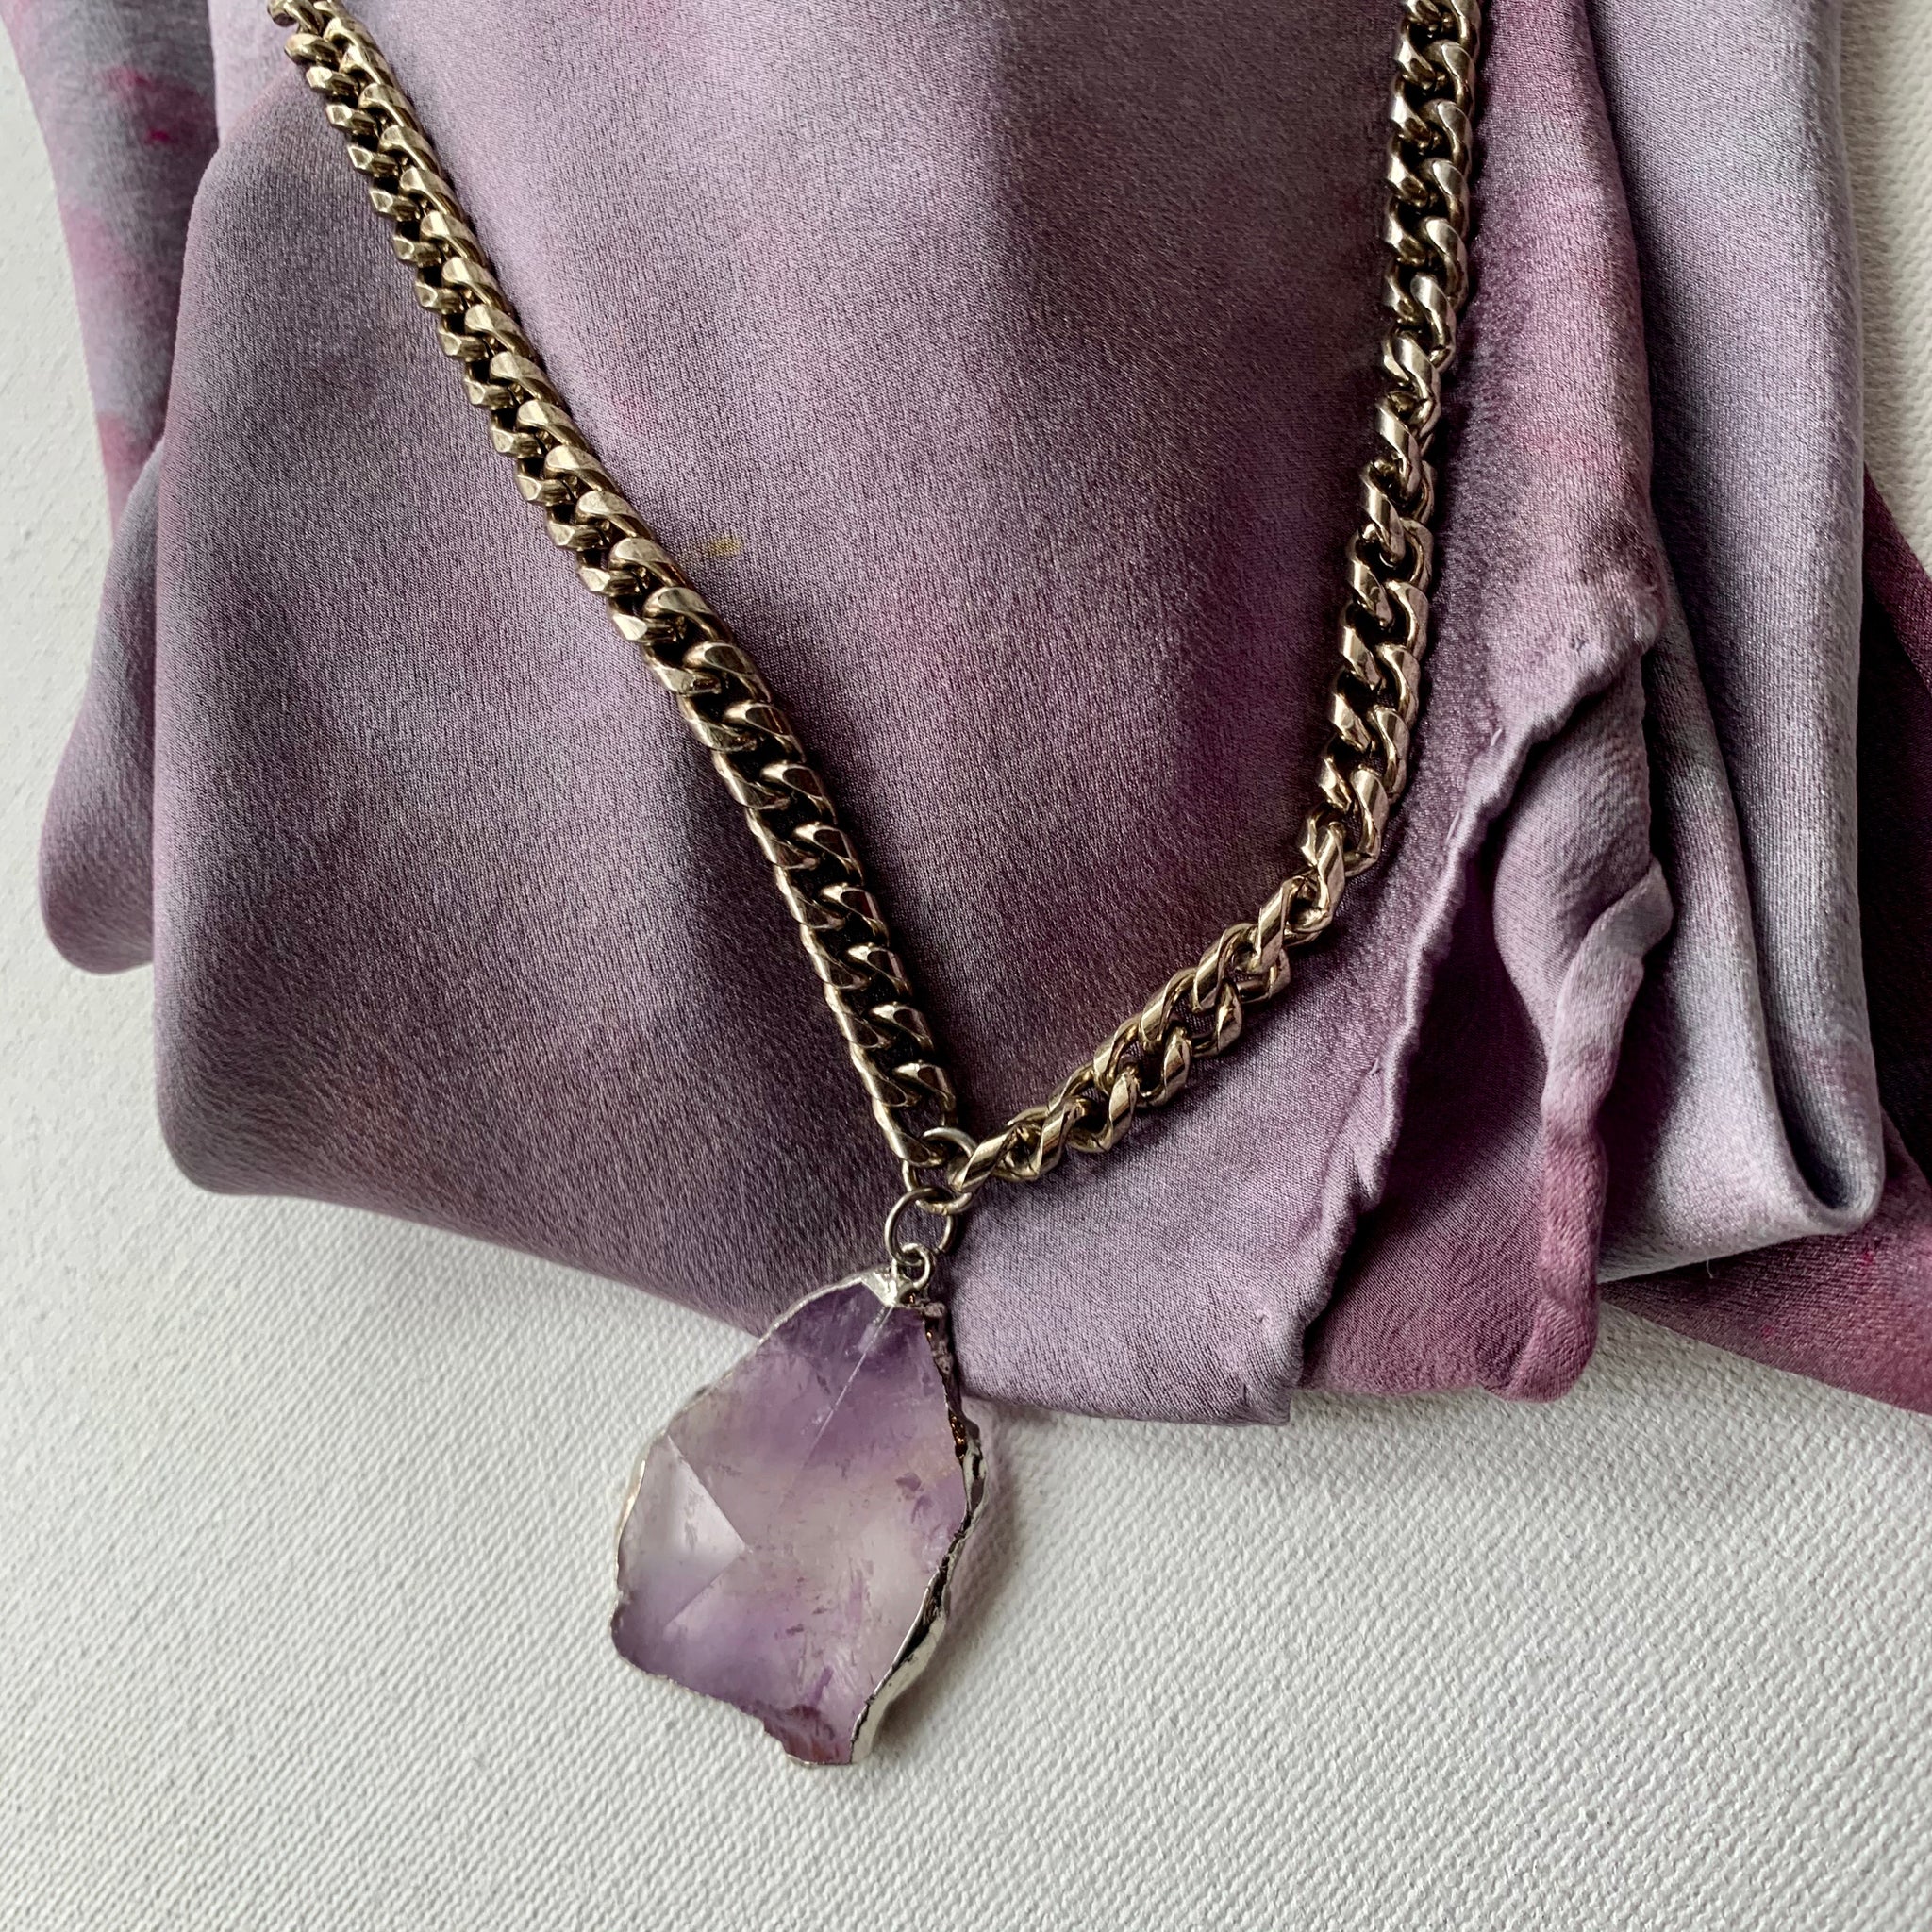 Stone Cooper Necklace - Natural stone with Vintage chain